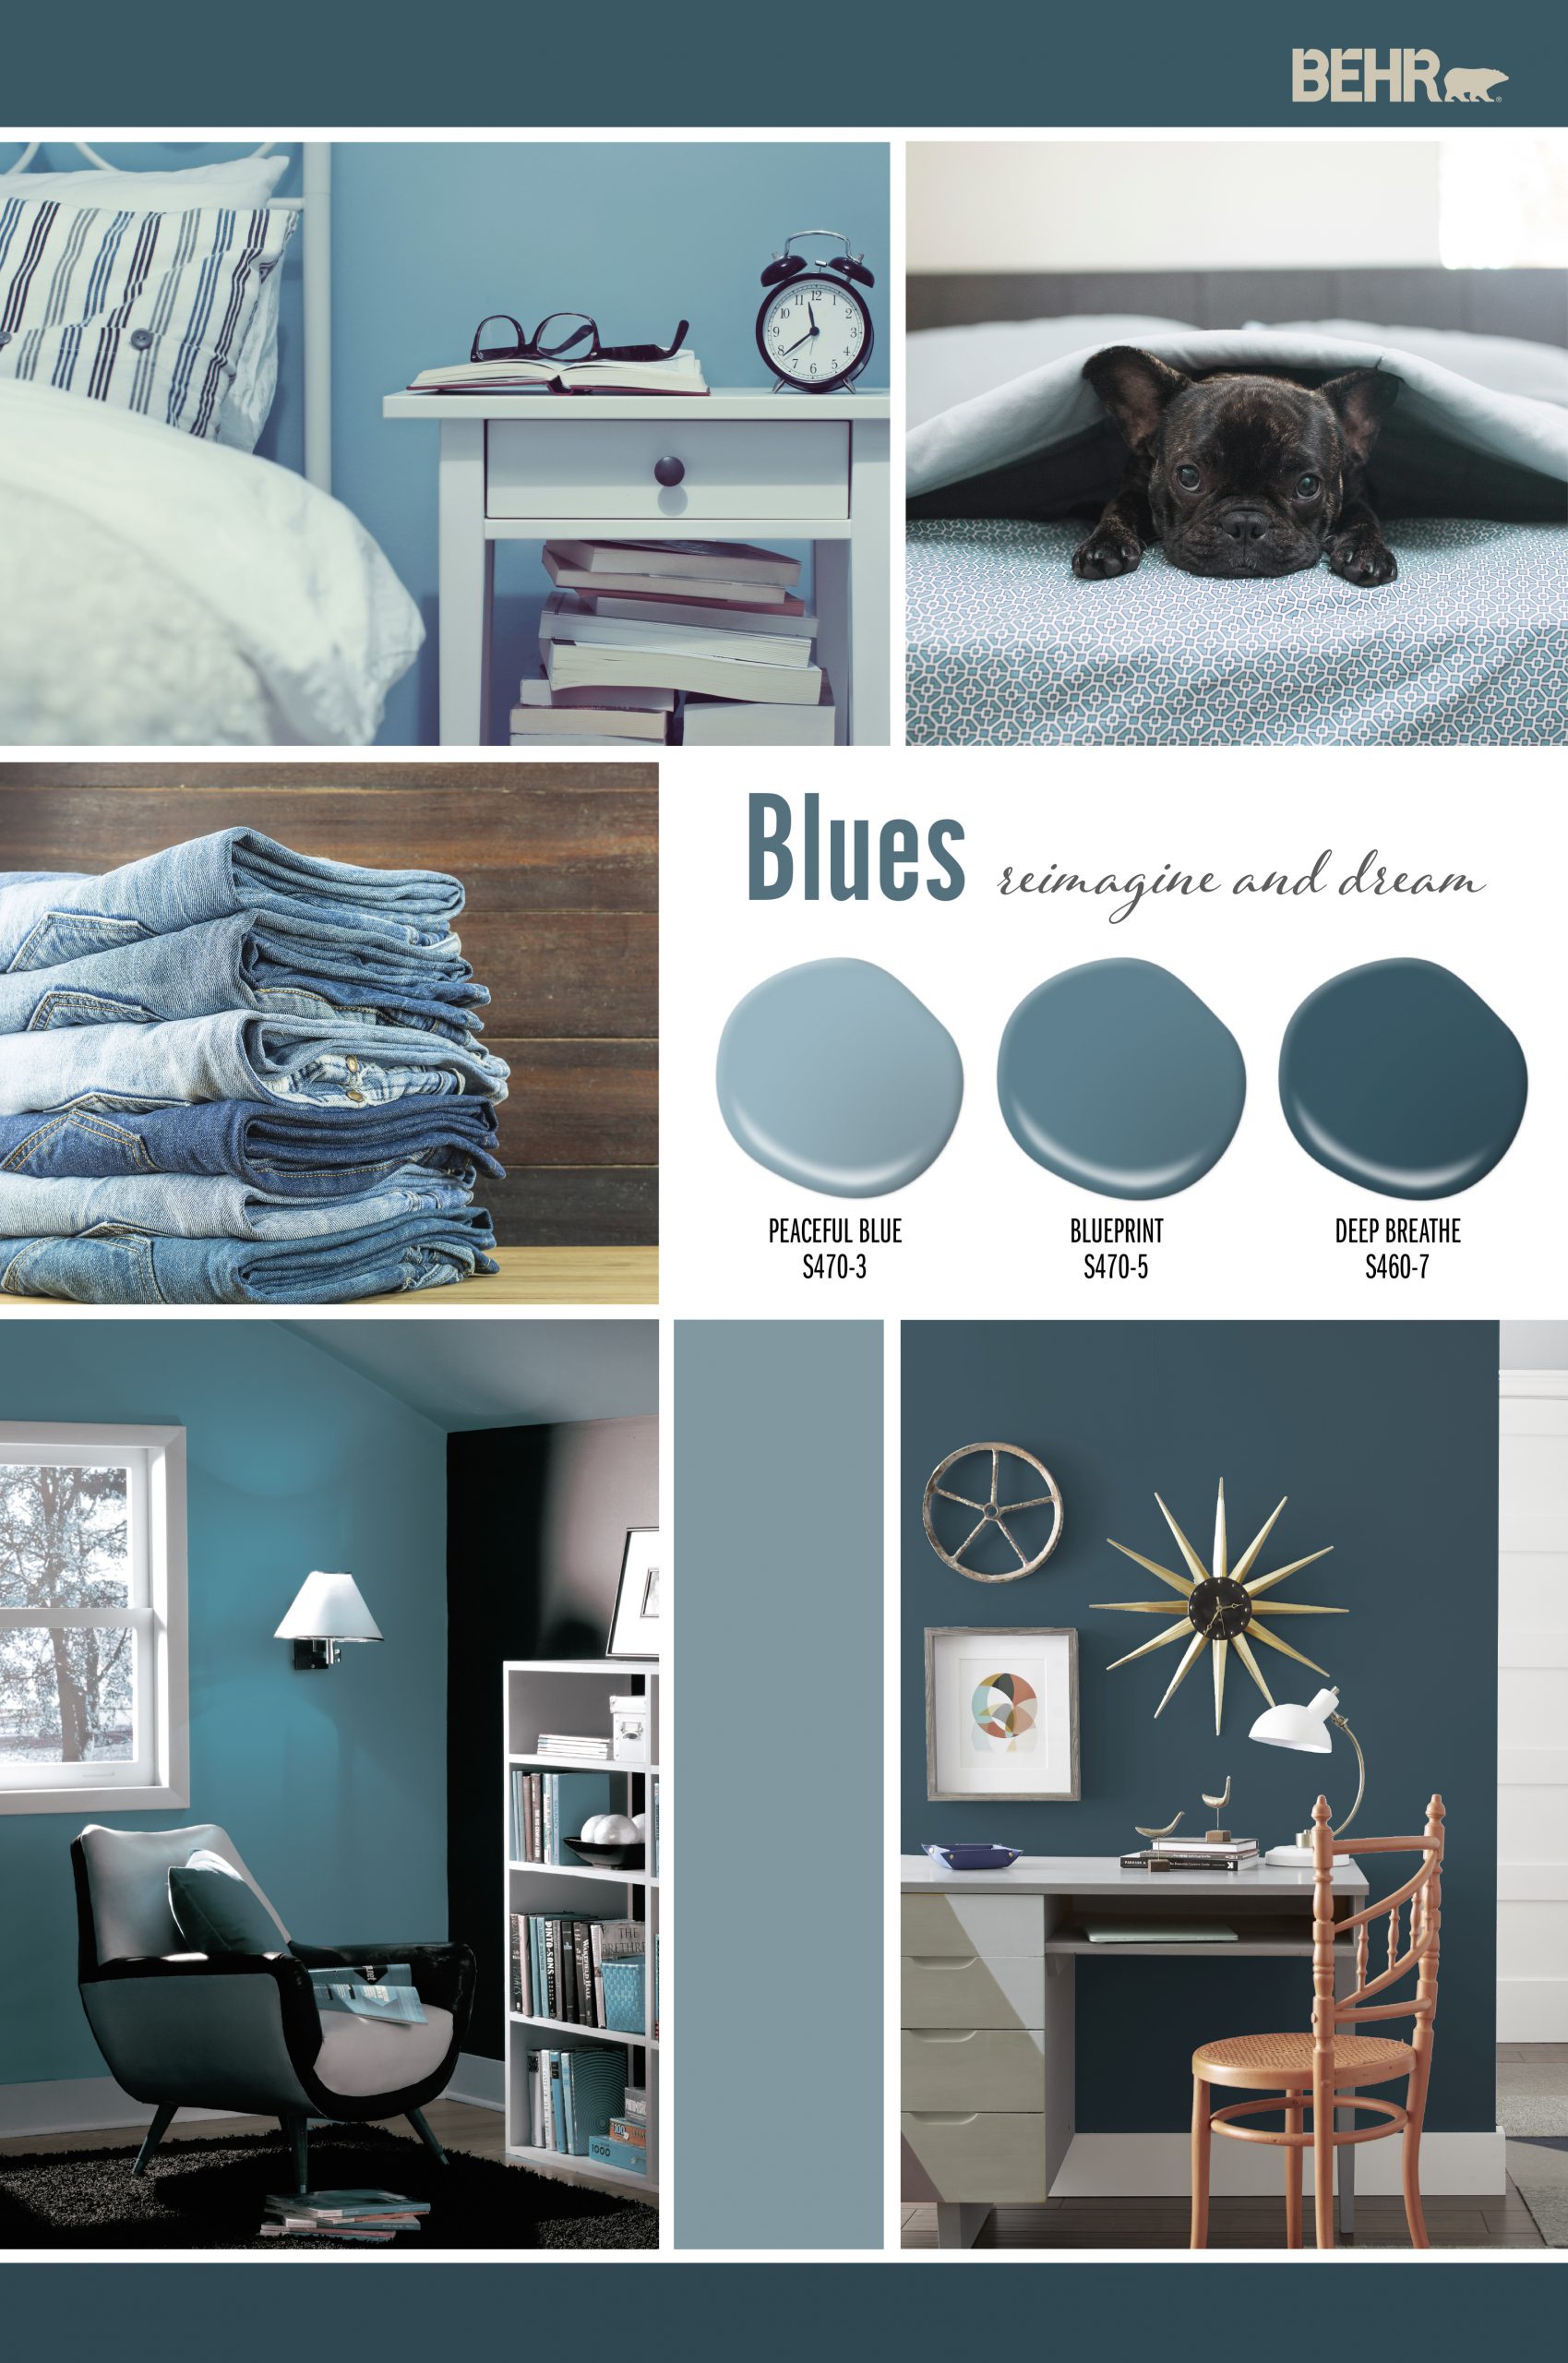 Inspiration Board featuring three blue paint drops: Peaceful Blue, Blueprint, Deep Breathe Images shown are the following: -A bedroom with walls painted I Peaceful Blue. -A dog lying on a bed under a blue blanket. -A stack of blue jeans. -A reading nook with walls painted in Blueprint. -Teens homework desk with wall painted in Deep Breathe.